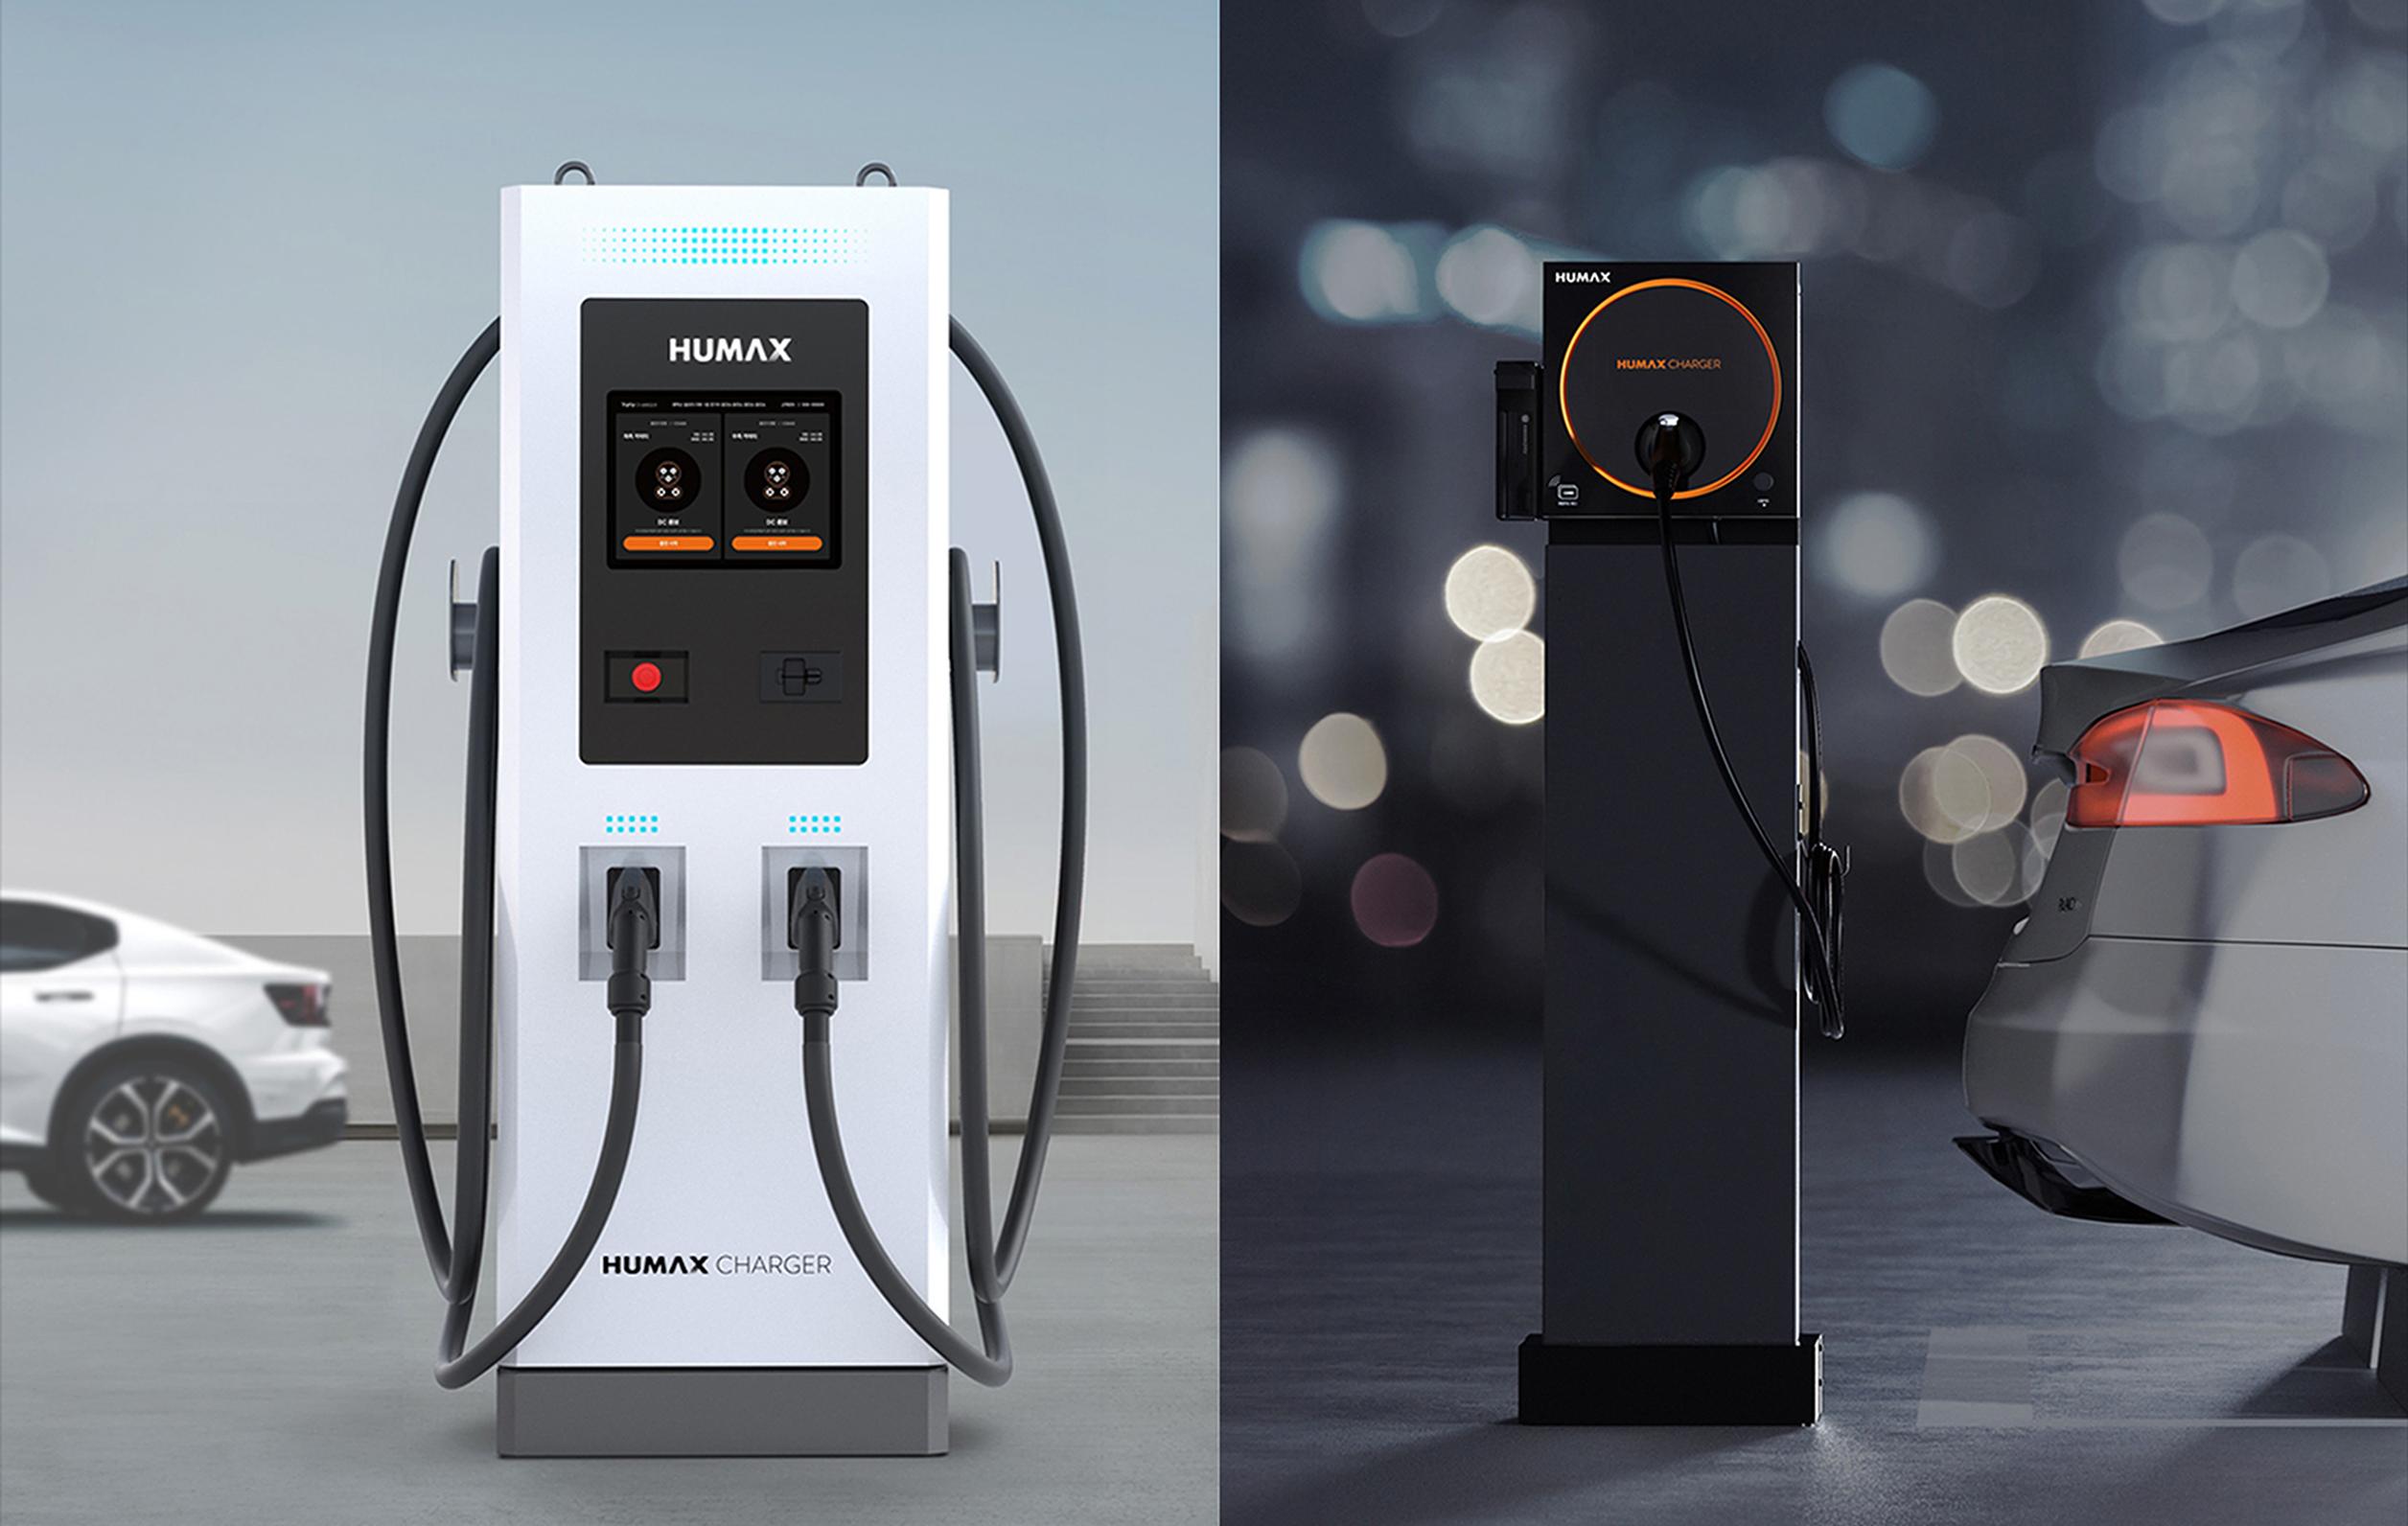 Humax enters the global market for commercial EV chargers